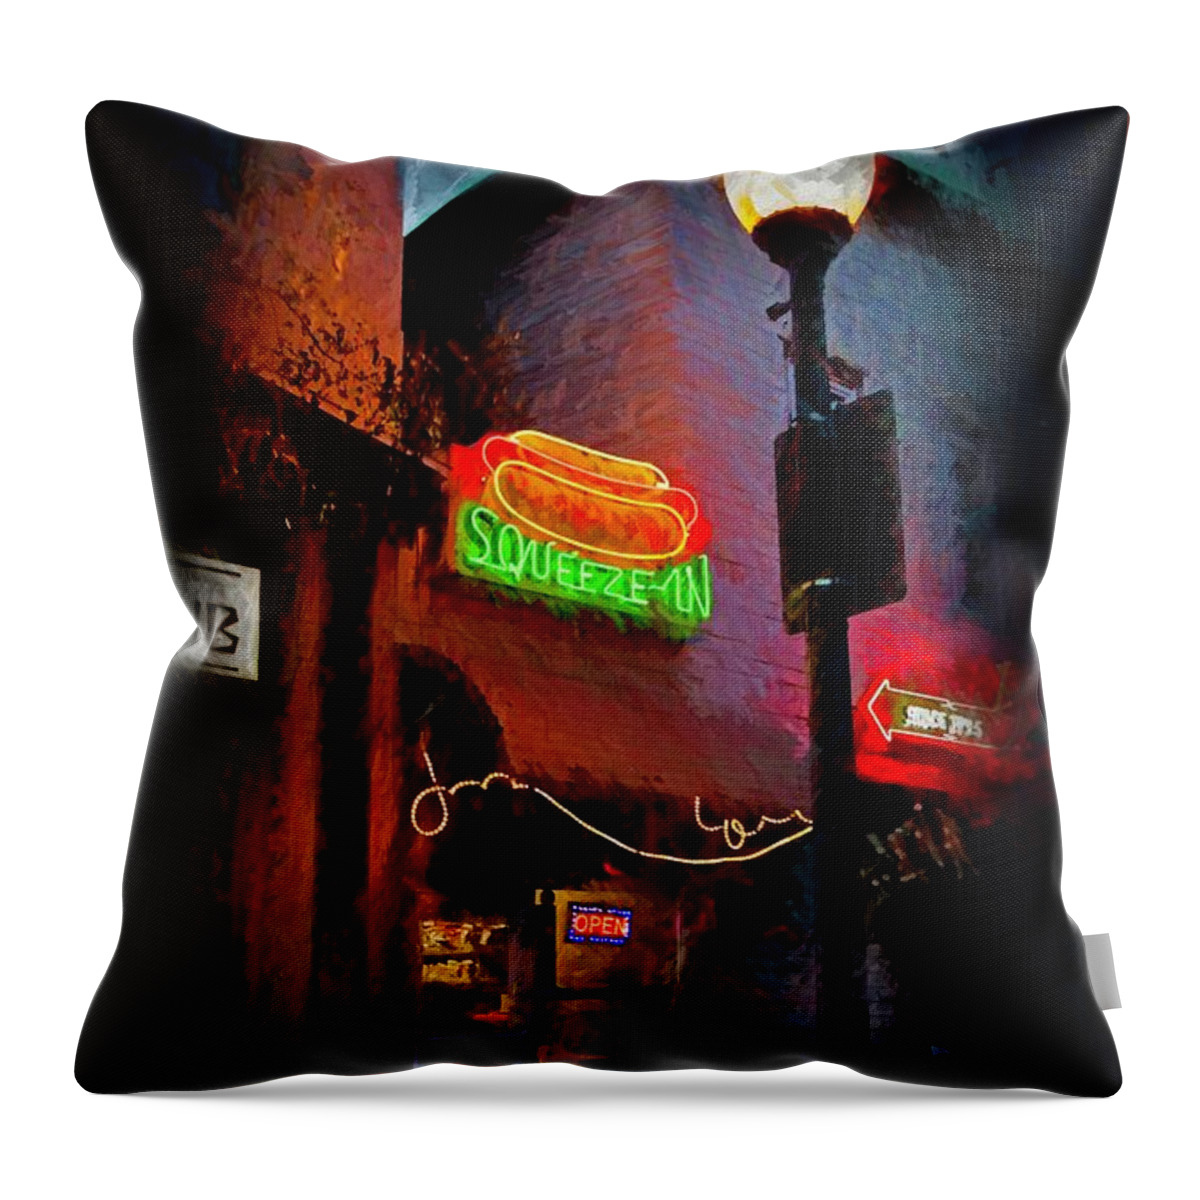 Squeeze Throw Pillow featuring the digital art Squeeze-In, Sunbury, PA by Barry Wills